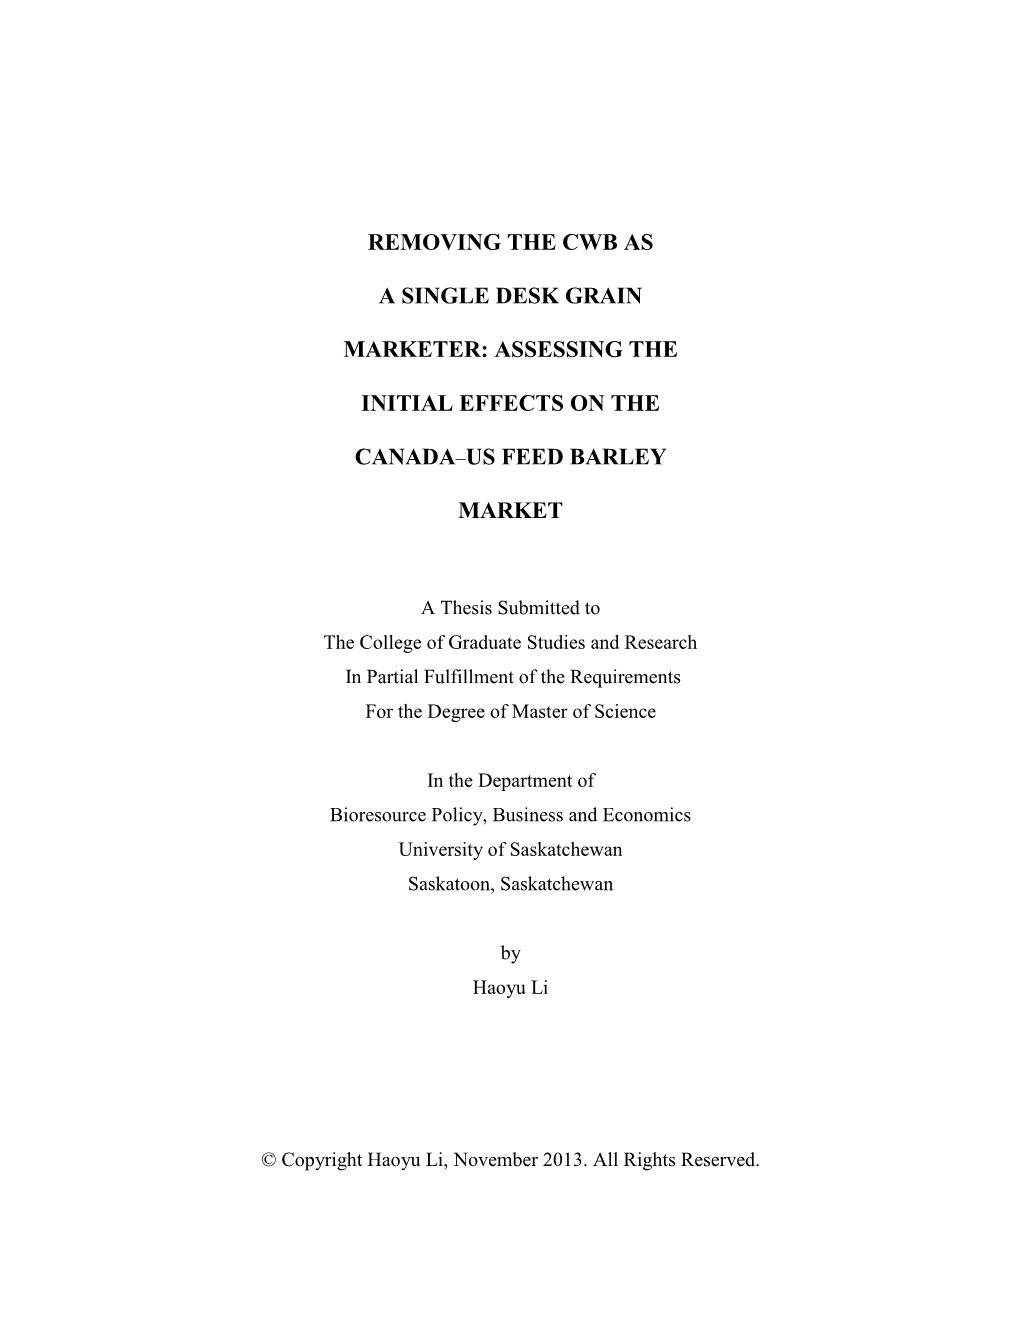 Removing the CWB As a Single Desk Grain Marketer: Assessing the Initial Effects on the Canada–US Feed Barley Market Thesis Supervisor: Dr